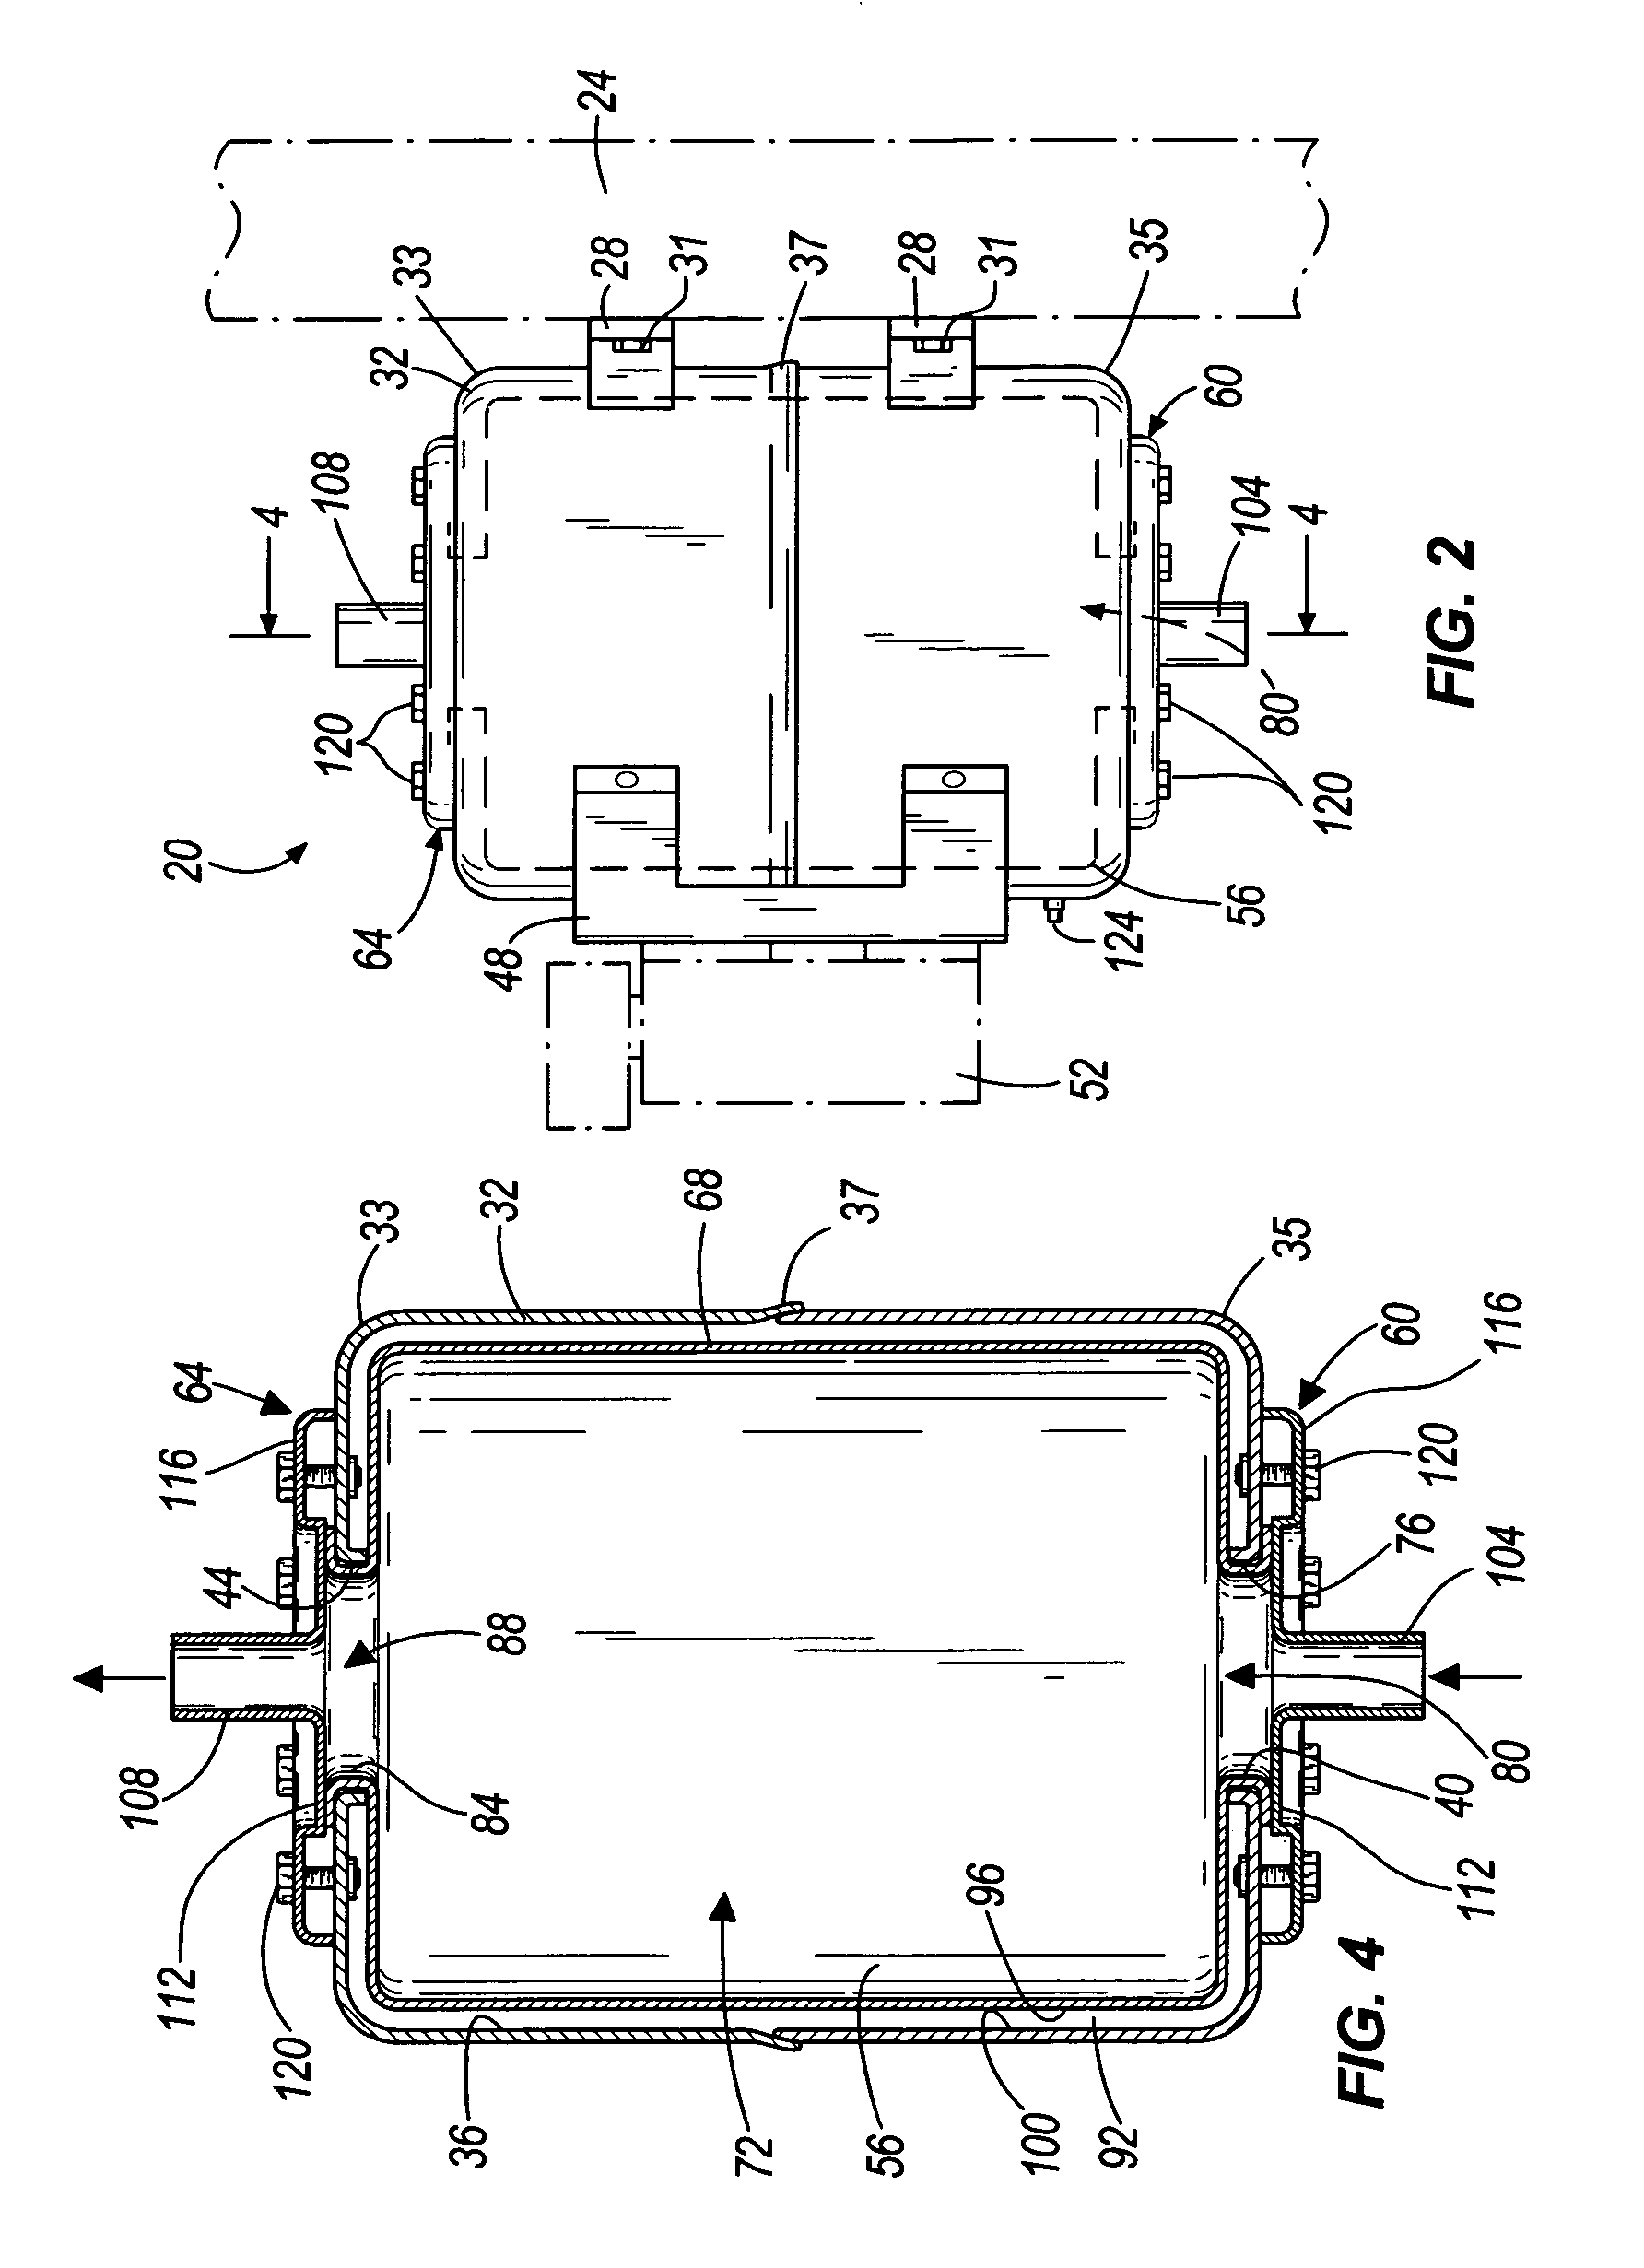 Accumulator tank assembly and method